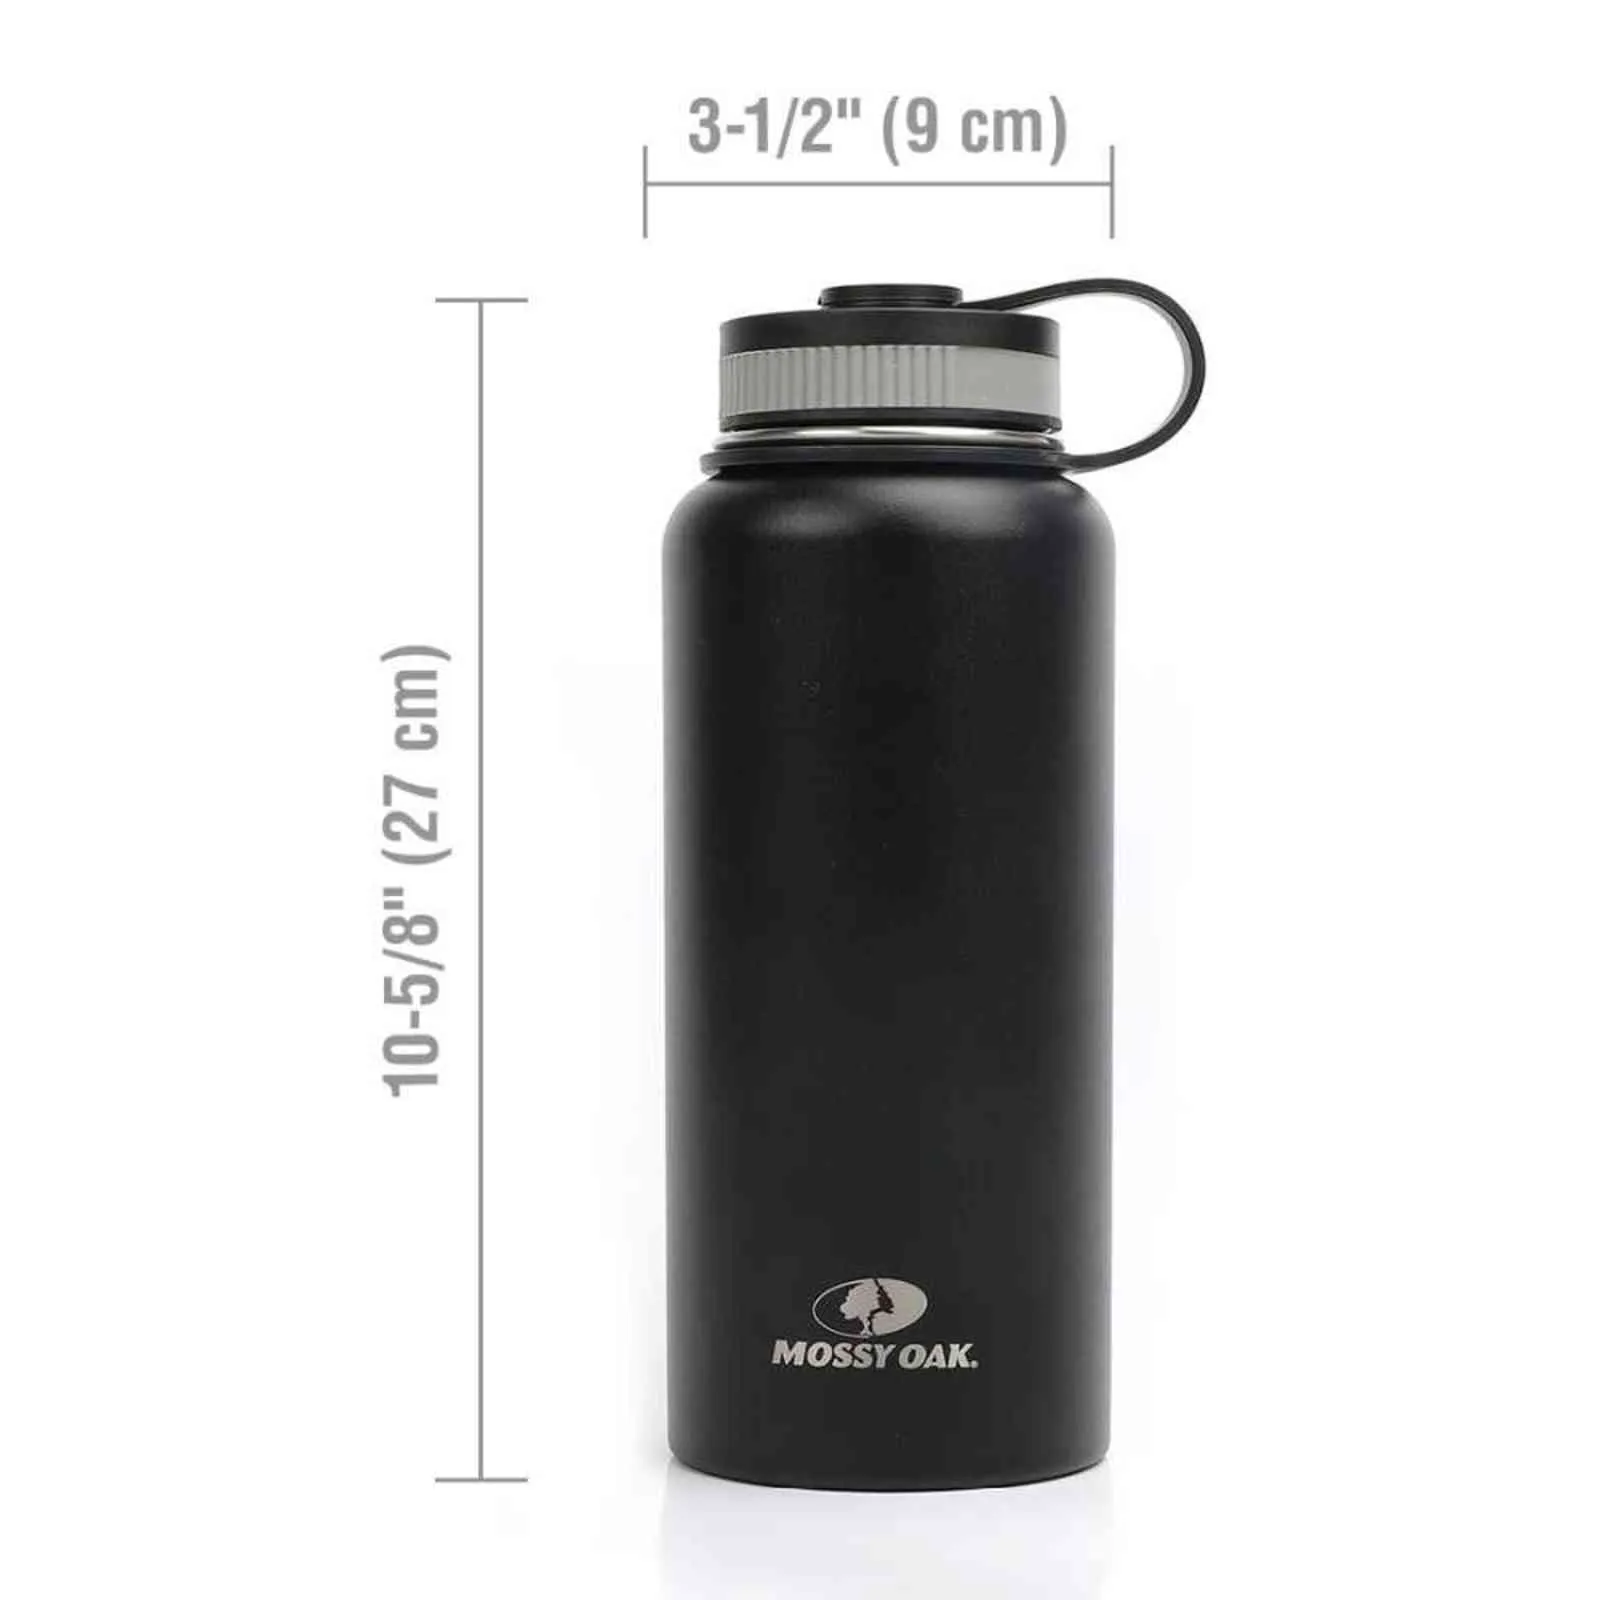 MOSSY OAK 900ml Stainless Steel Vacuum Insulated Sports Water Bottle - Wide Mouth Leak-Proof Double Wall with 3 Lids 211109